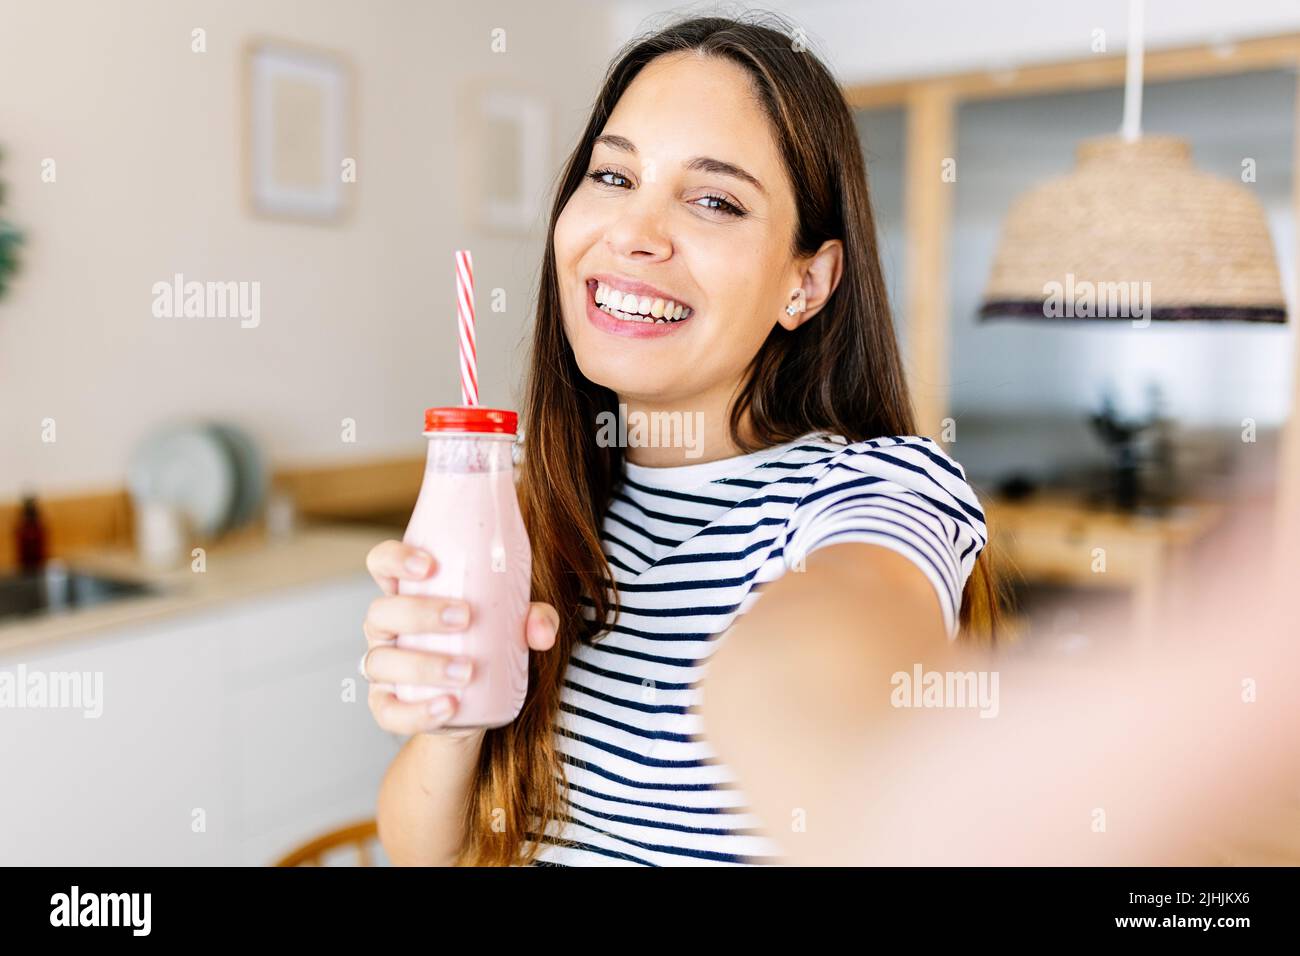 Young woman with strawberry juice taking selfie in the kitchen Stock Photo